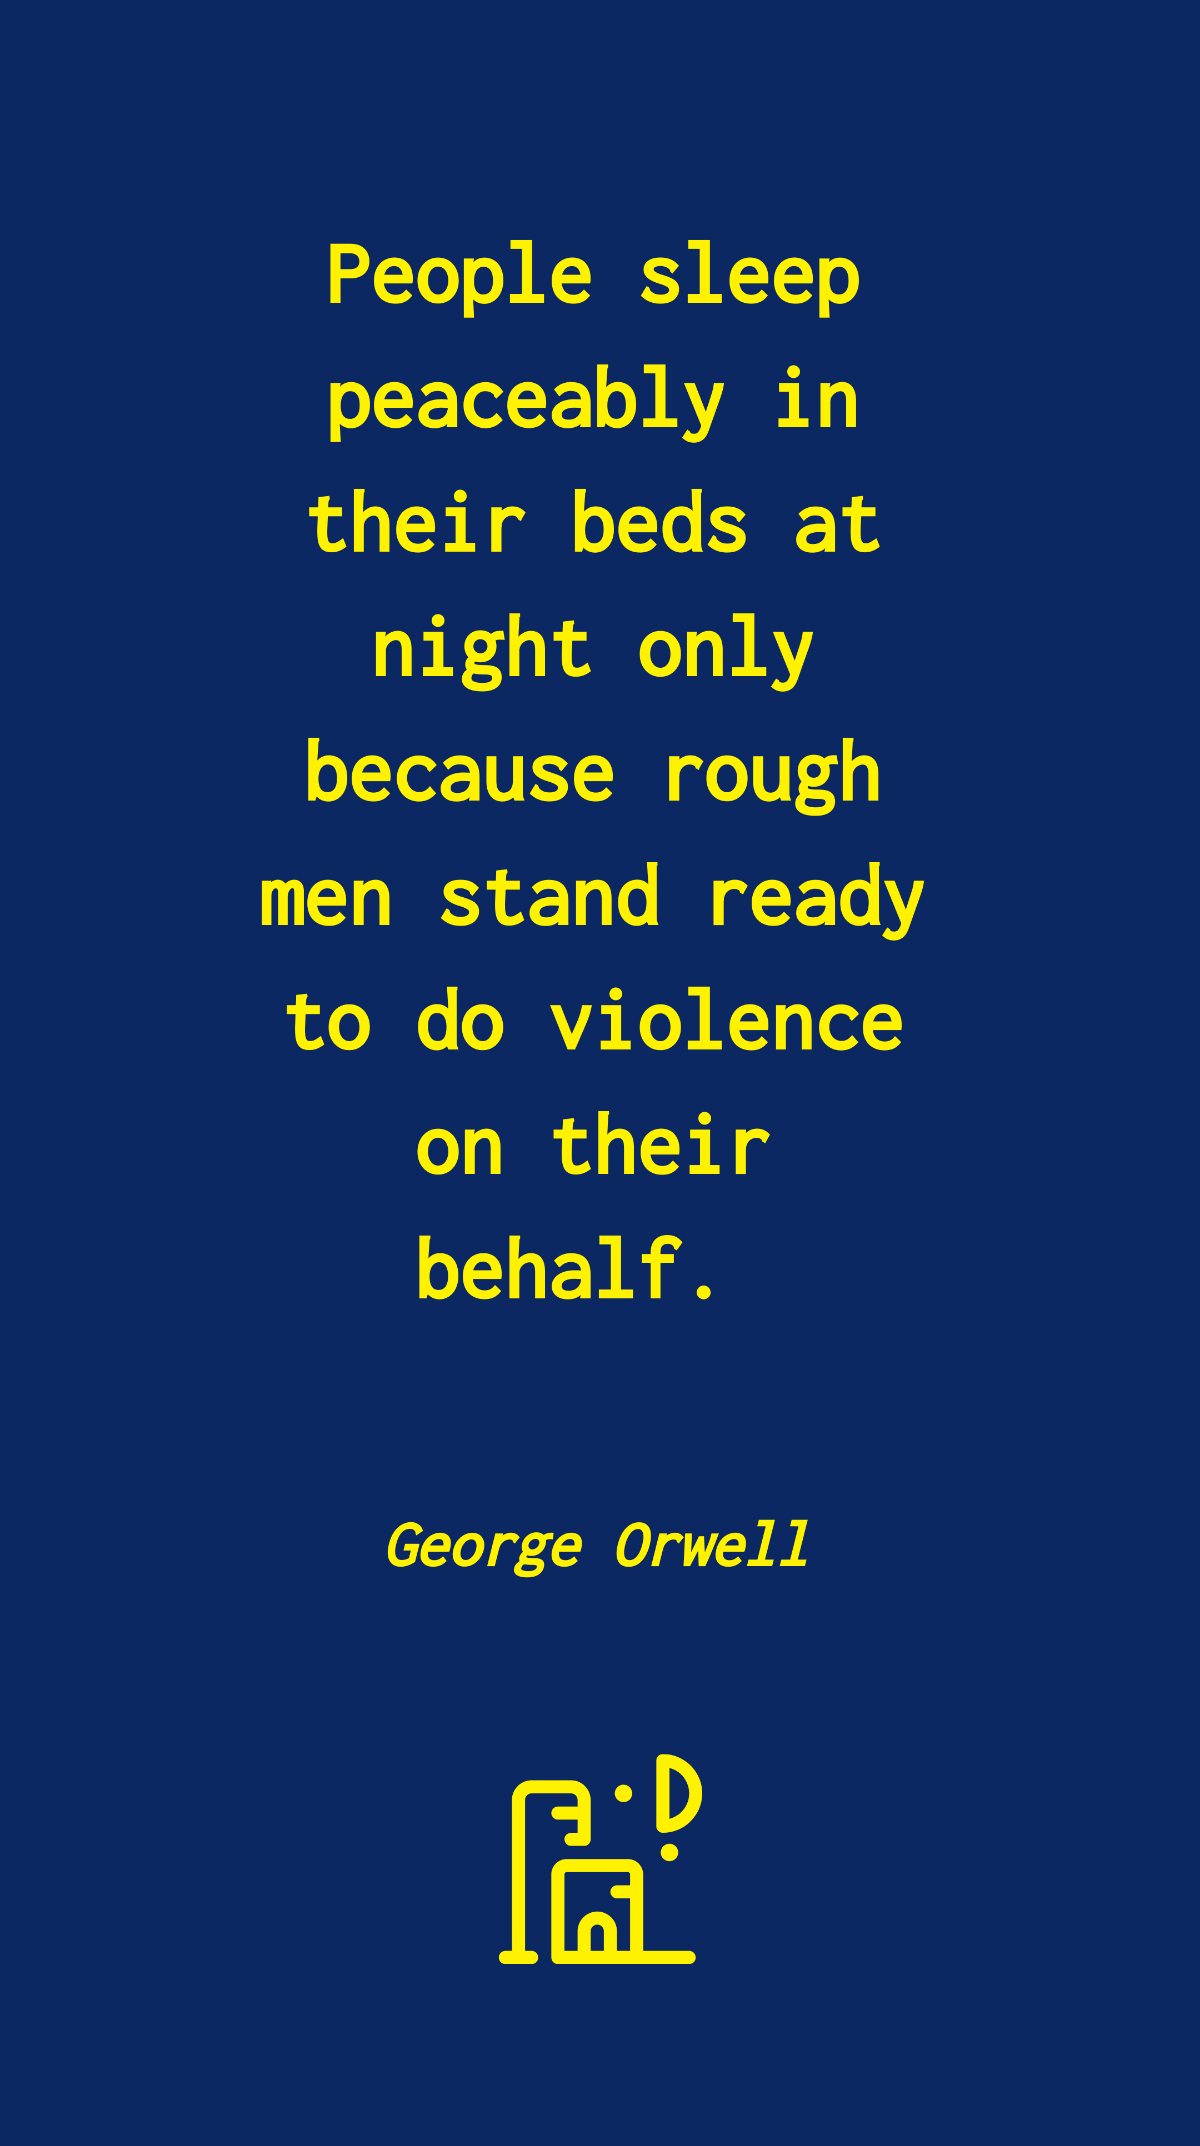 George Orwell - People sleep peaceably in their beds at night only because rough men stand ready to do violence on their behalf.